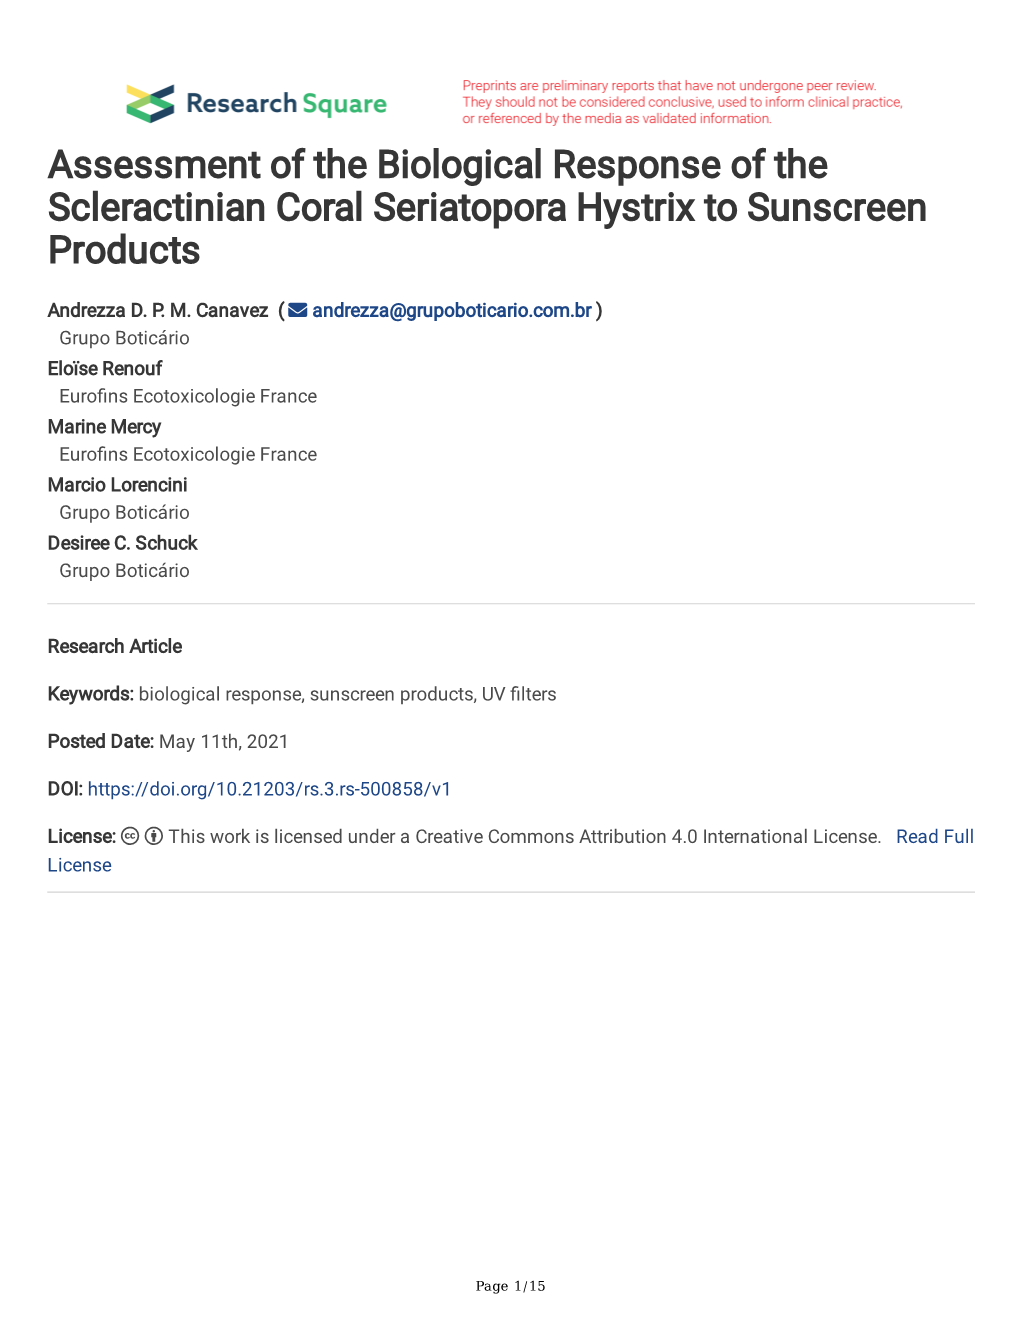 Assessment of the Biological Response of the Scleractinian Coral Seriatopora Hystrix to Sunscreen Products